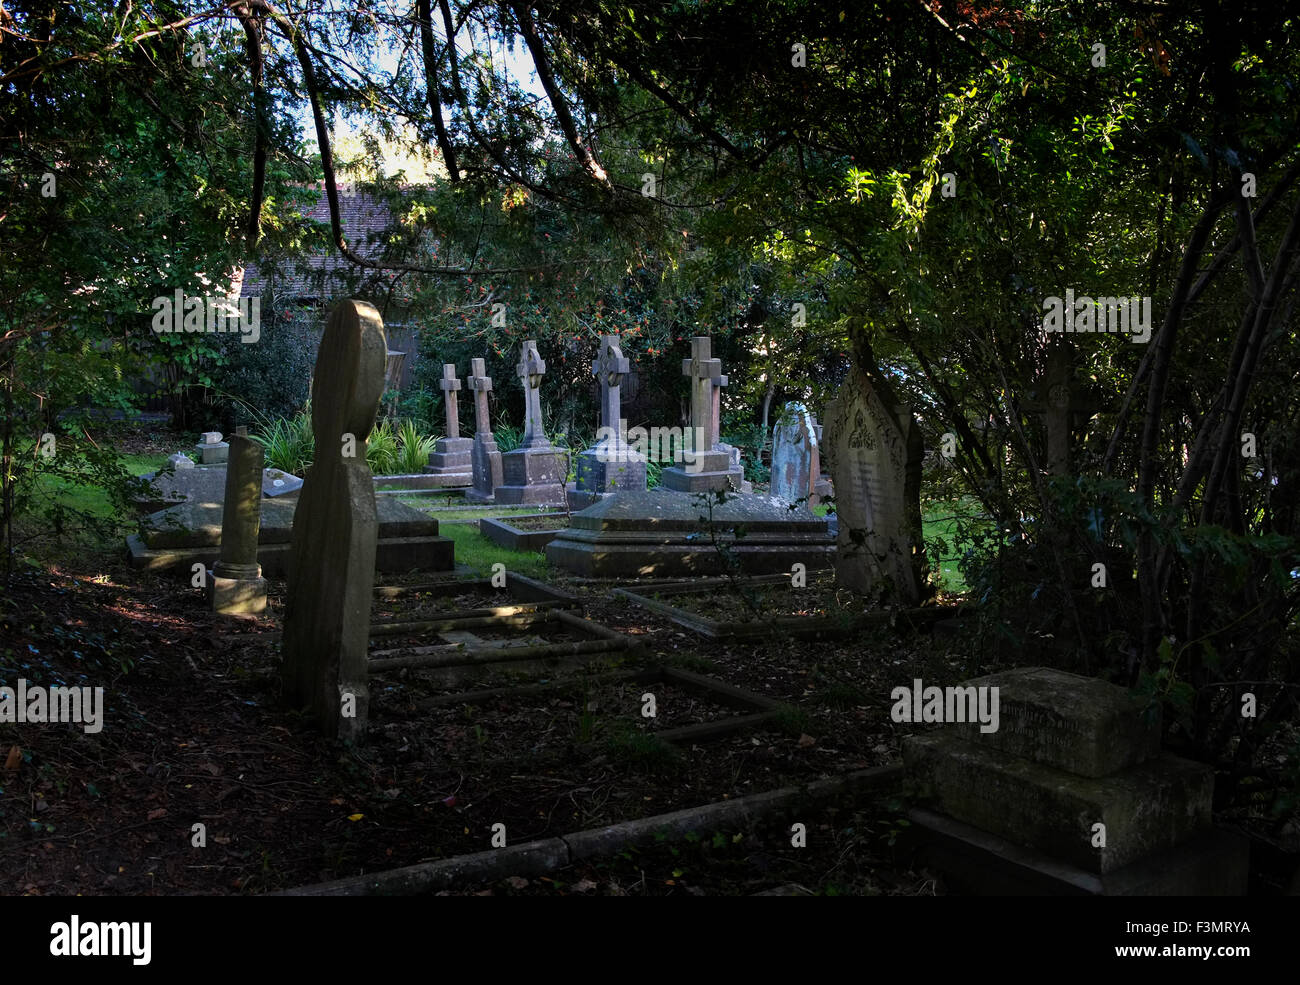 Graves in the graveyard of a Victorian church in Sneyd Park, Bristol surrounded by Yew trees, a UK Stock Photo